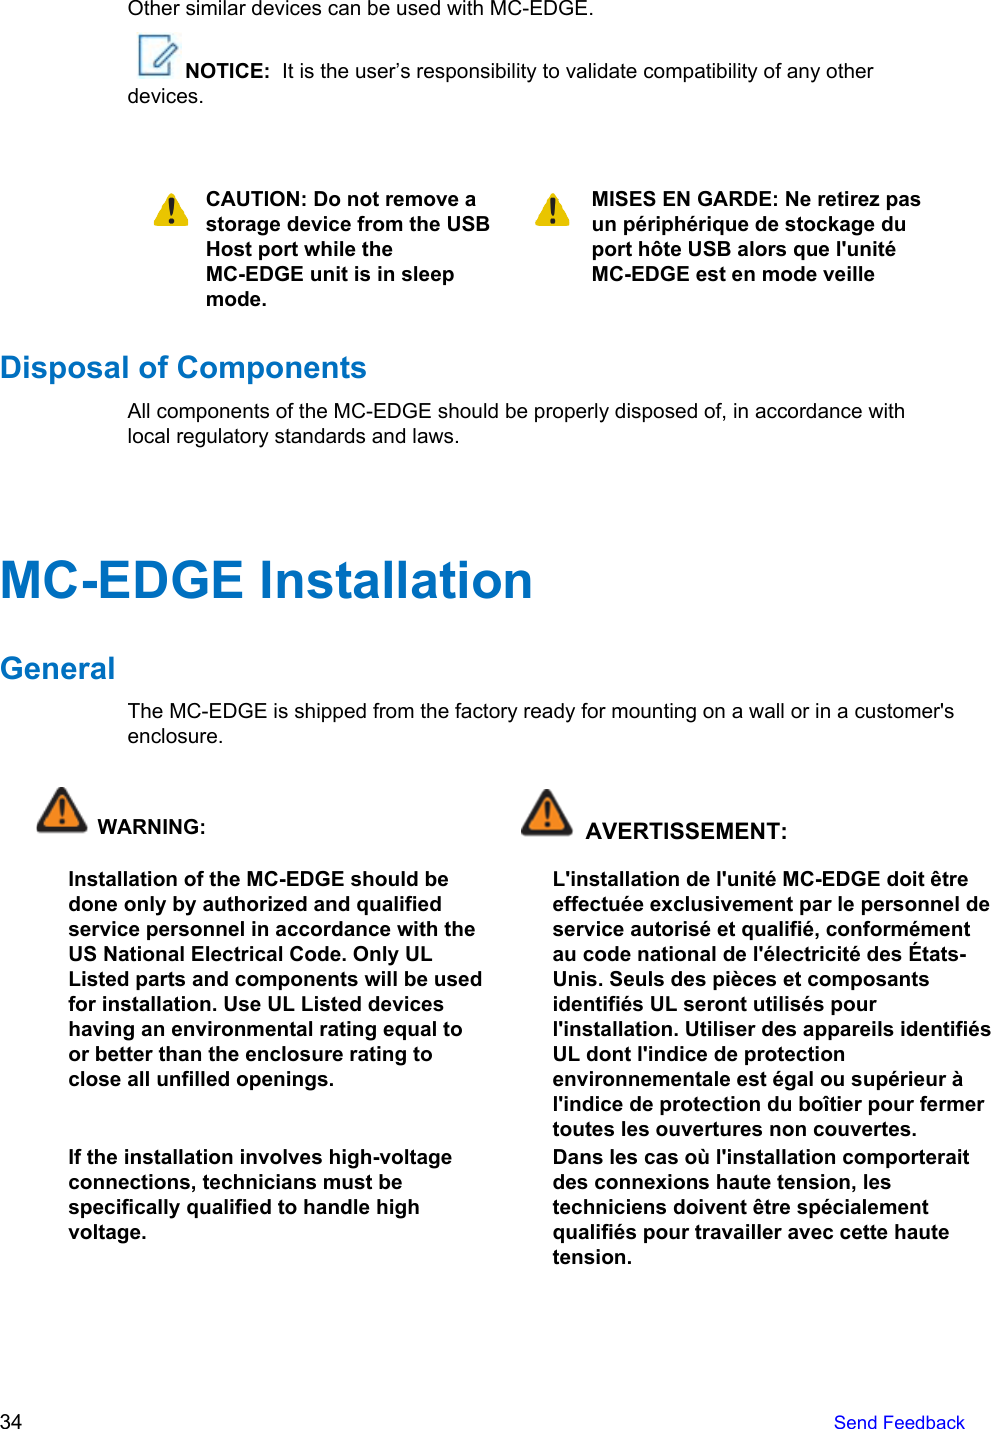   Other similar devices can be used with MC-EDGE.  NOTICE:  It is the user’s responsibility to validate compatibility of any other devices.    CAUTION: Do not remove a storage device from the USB Host port while the MC-EDGE unit is in sleep mode.  MISES EN GARDE: Ne retirez pas un périphérique de stockage du port hôte USB alors que l&apos;unité MC-EDGE est en mode veille Disposal of Components All components of the MC-EDGE should be properly disposed of, in accordance with local regulatory standards and laws.   MC-EDGE Installation  General The MC-EDGE is shipped from the factory ready for mounting on a wall or in a customer&apos;s enclosure.    WARNING:  AVERTISSEMENT: Installation of the MC-EDGE should be done only by authorized and qualified service personnel in accordance with the US National Electrical Code. Only UL Listed parts and components will be used for installation. Use UL Listed devices having an environmental rating equal to or better than the enclosure rating to close all unfilled openings. L&apos;installation de l&apos;unité MC-EDGE doit être effectuée exclusivement par le personnel de service autorisé et qualifié, conformément au code national de l&apos;électricité des États- Unis. Seuls des pièces et composants identifiés UL seront utilisés pour l&apos;installation. Utiliser des appareils identifiés UL dont l&apos;indice de protection environnementale est égal ou supérieur à l&apos;indice de protection du boîtier pour fermer toutes les ouvertures non couvertes. If the installation involves high-voltage connections, technicians must be specifically qualified to handle high voltage. Dans les cas où l&apos;installation comporterait des connexions haute tension, les techniciens doivent être spécialement qualifiés pour travailler avec cette haute tension. 34   Send Feedback  